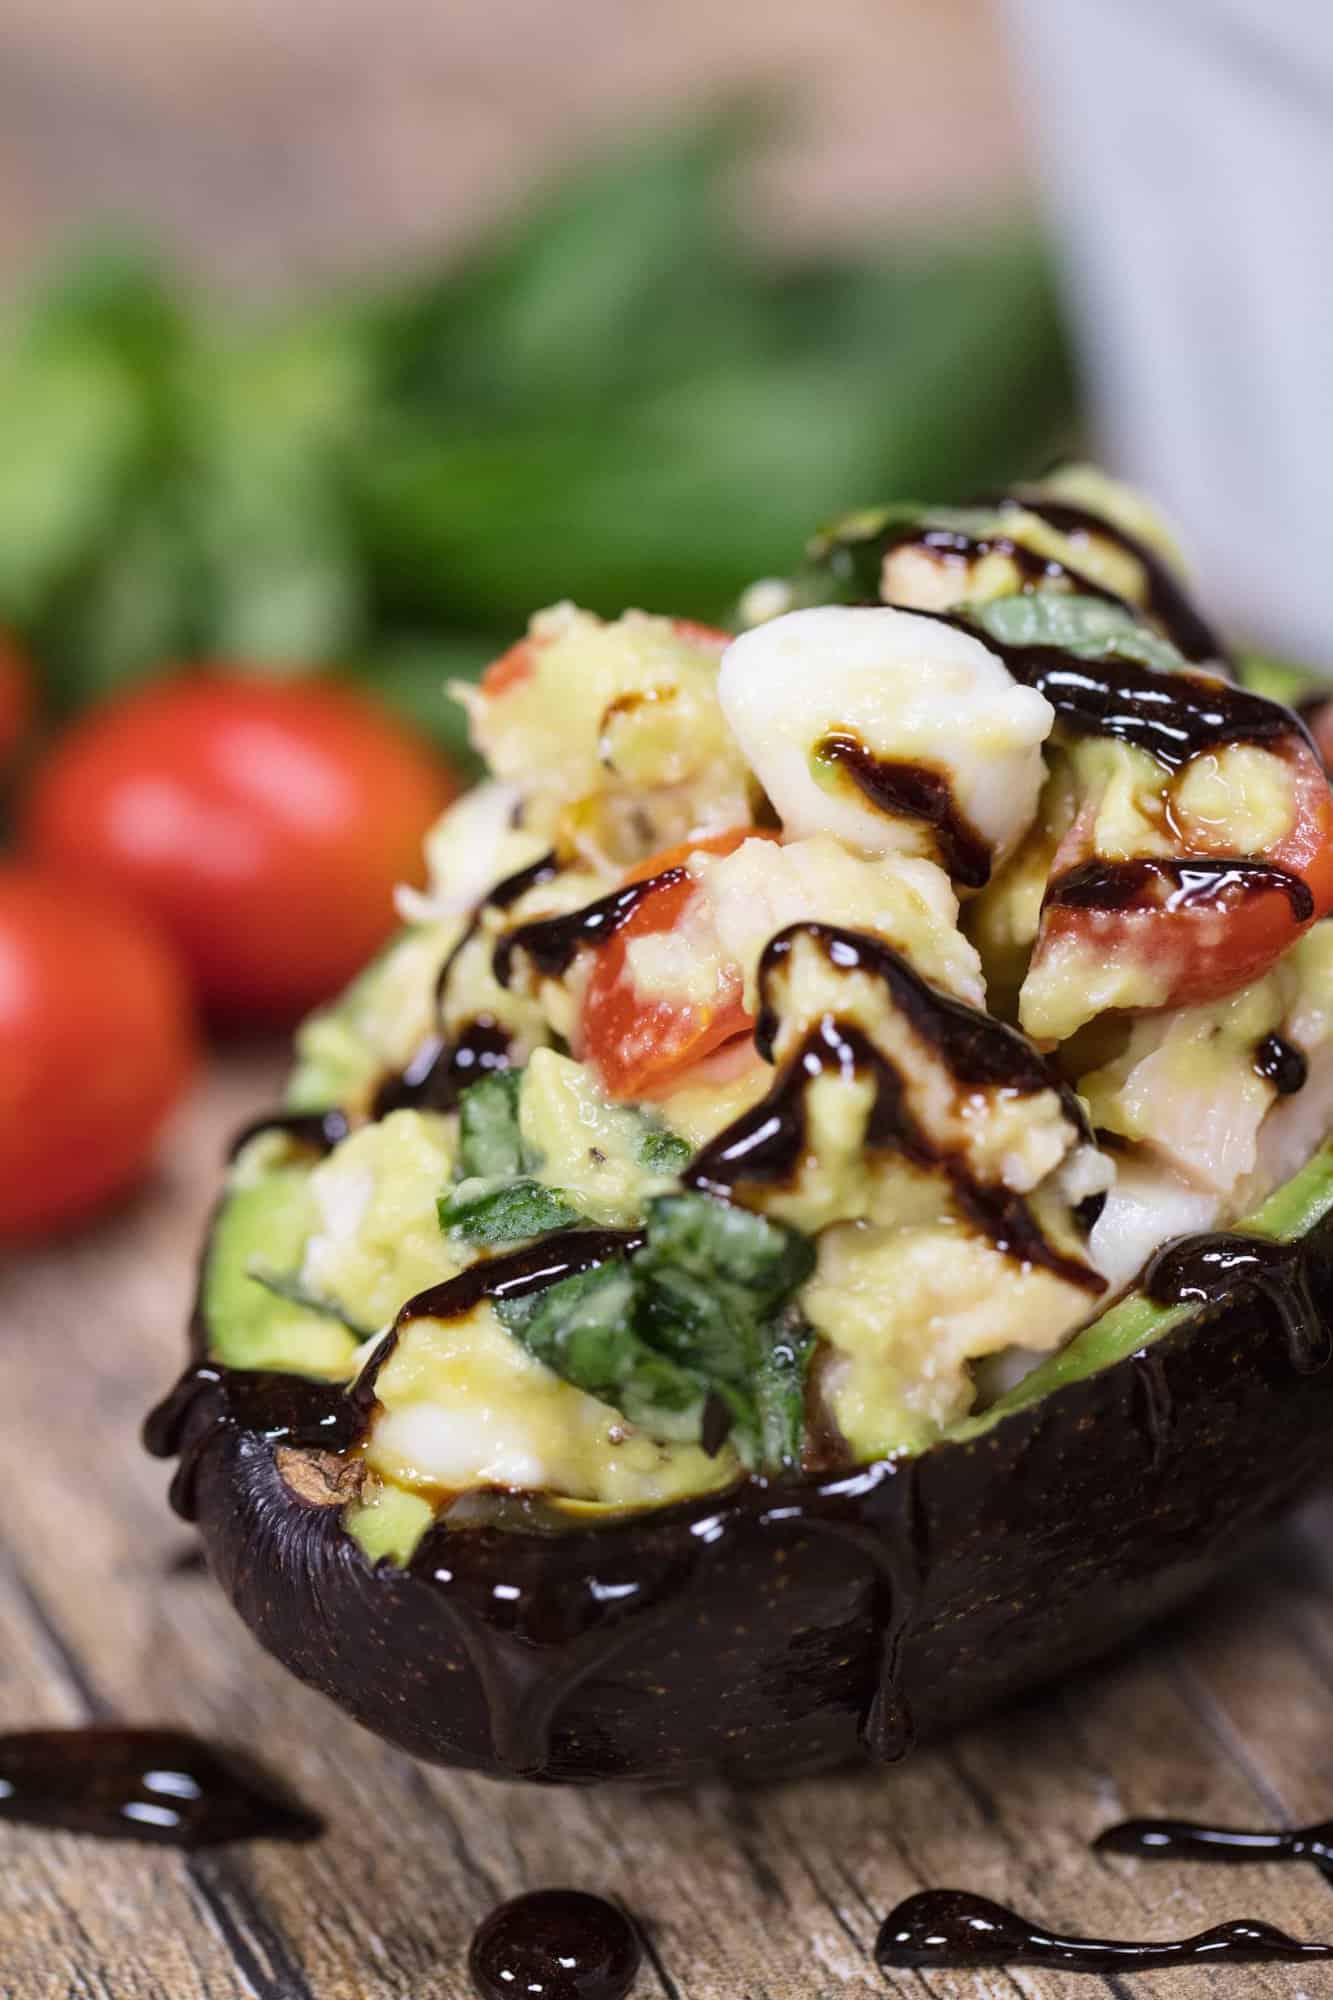 Caprese Stuffed Avocados have all the flavors of caprese you love stuffed into an avocado. It's an easy and healthy lunch that will quickly become one of your favorites.